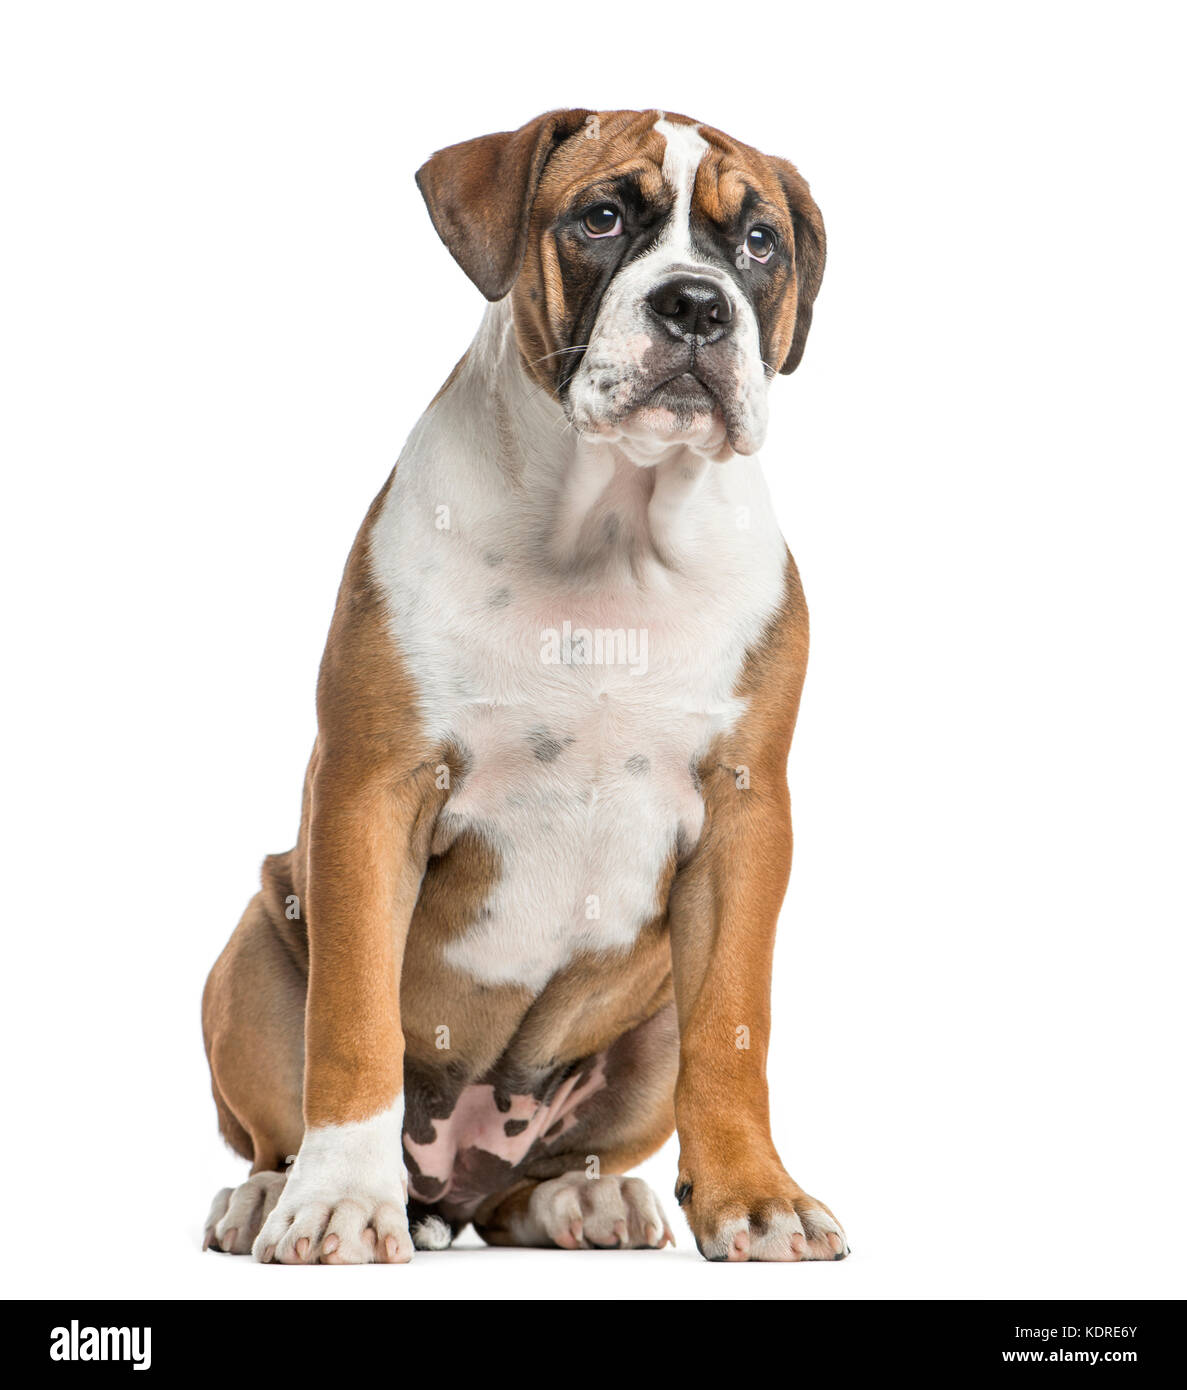 Are Boxers Related To Bulldogs